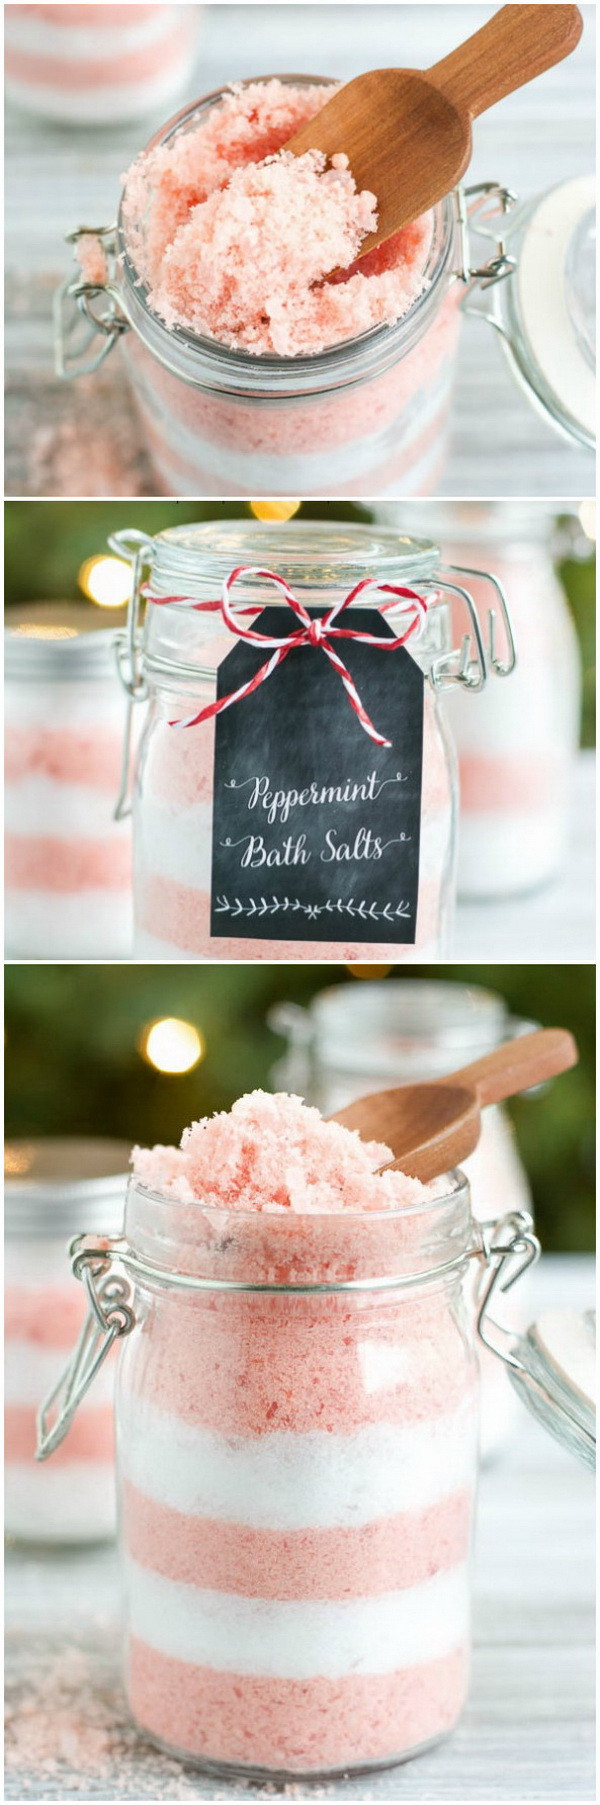 DIY Christmas Gift Idea
 30 Homemade Christmas Gifts Everyone will Love For